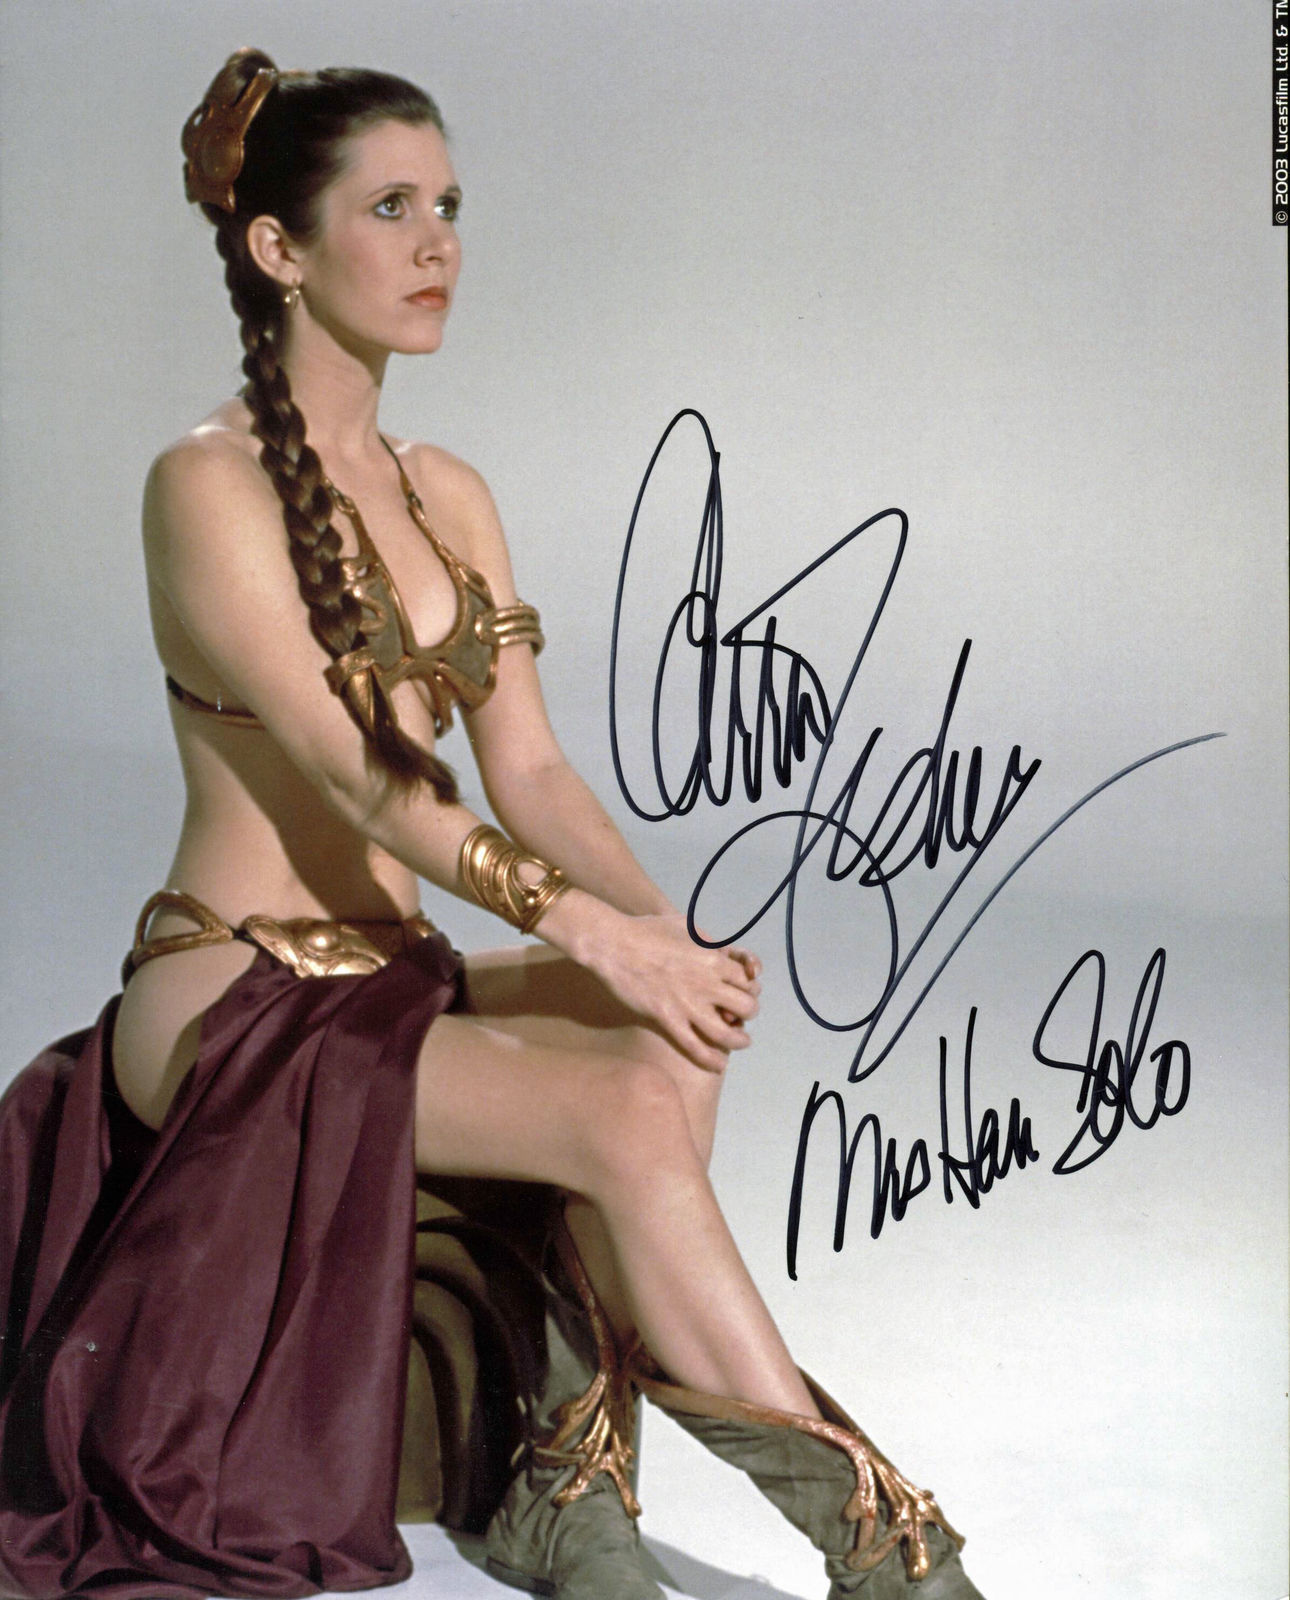 Carrie fisher nude